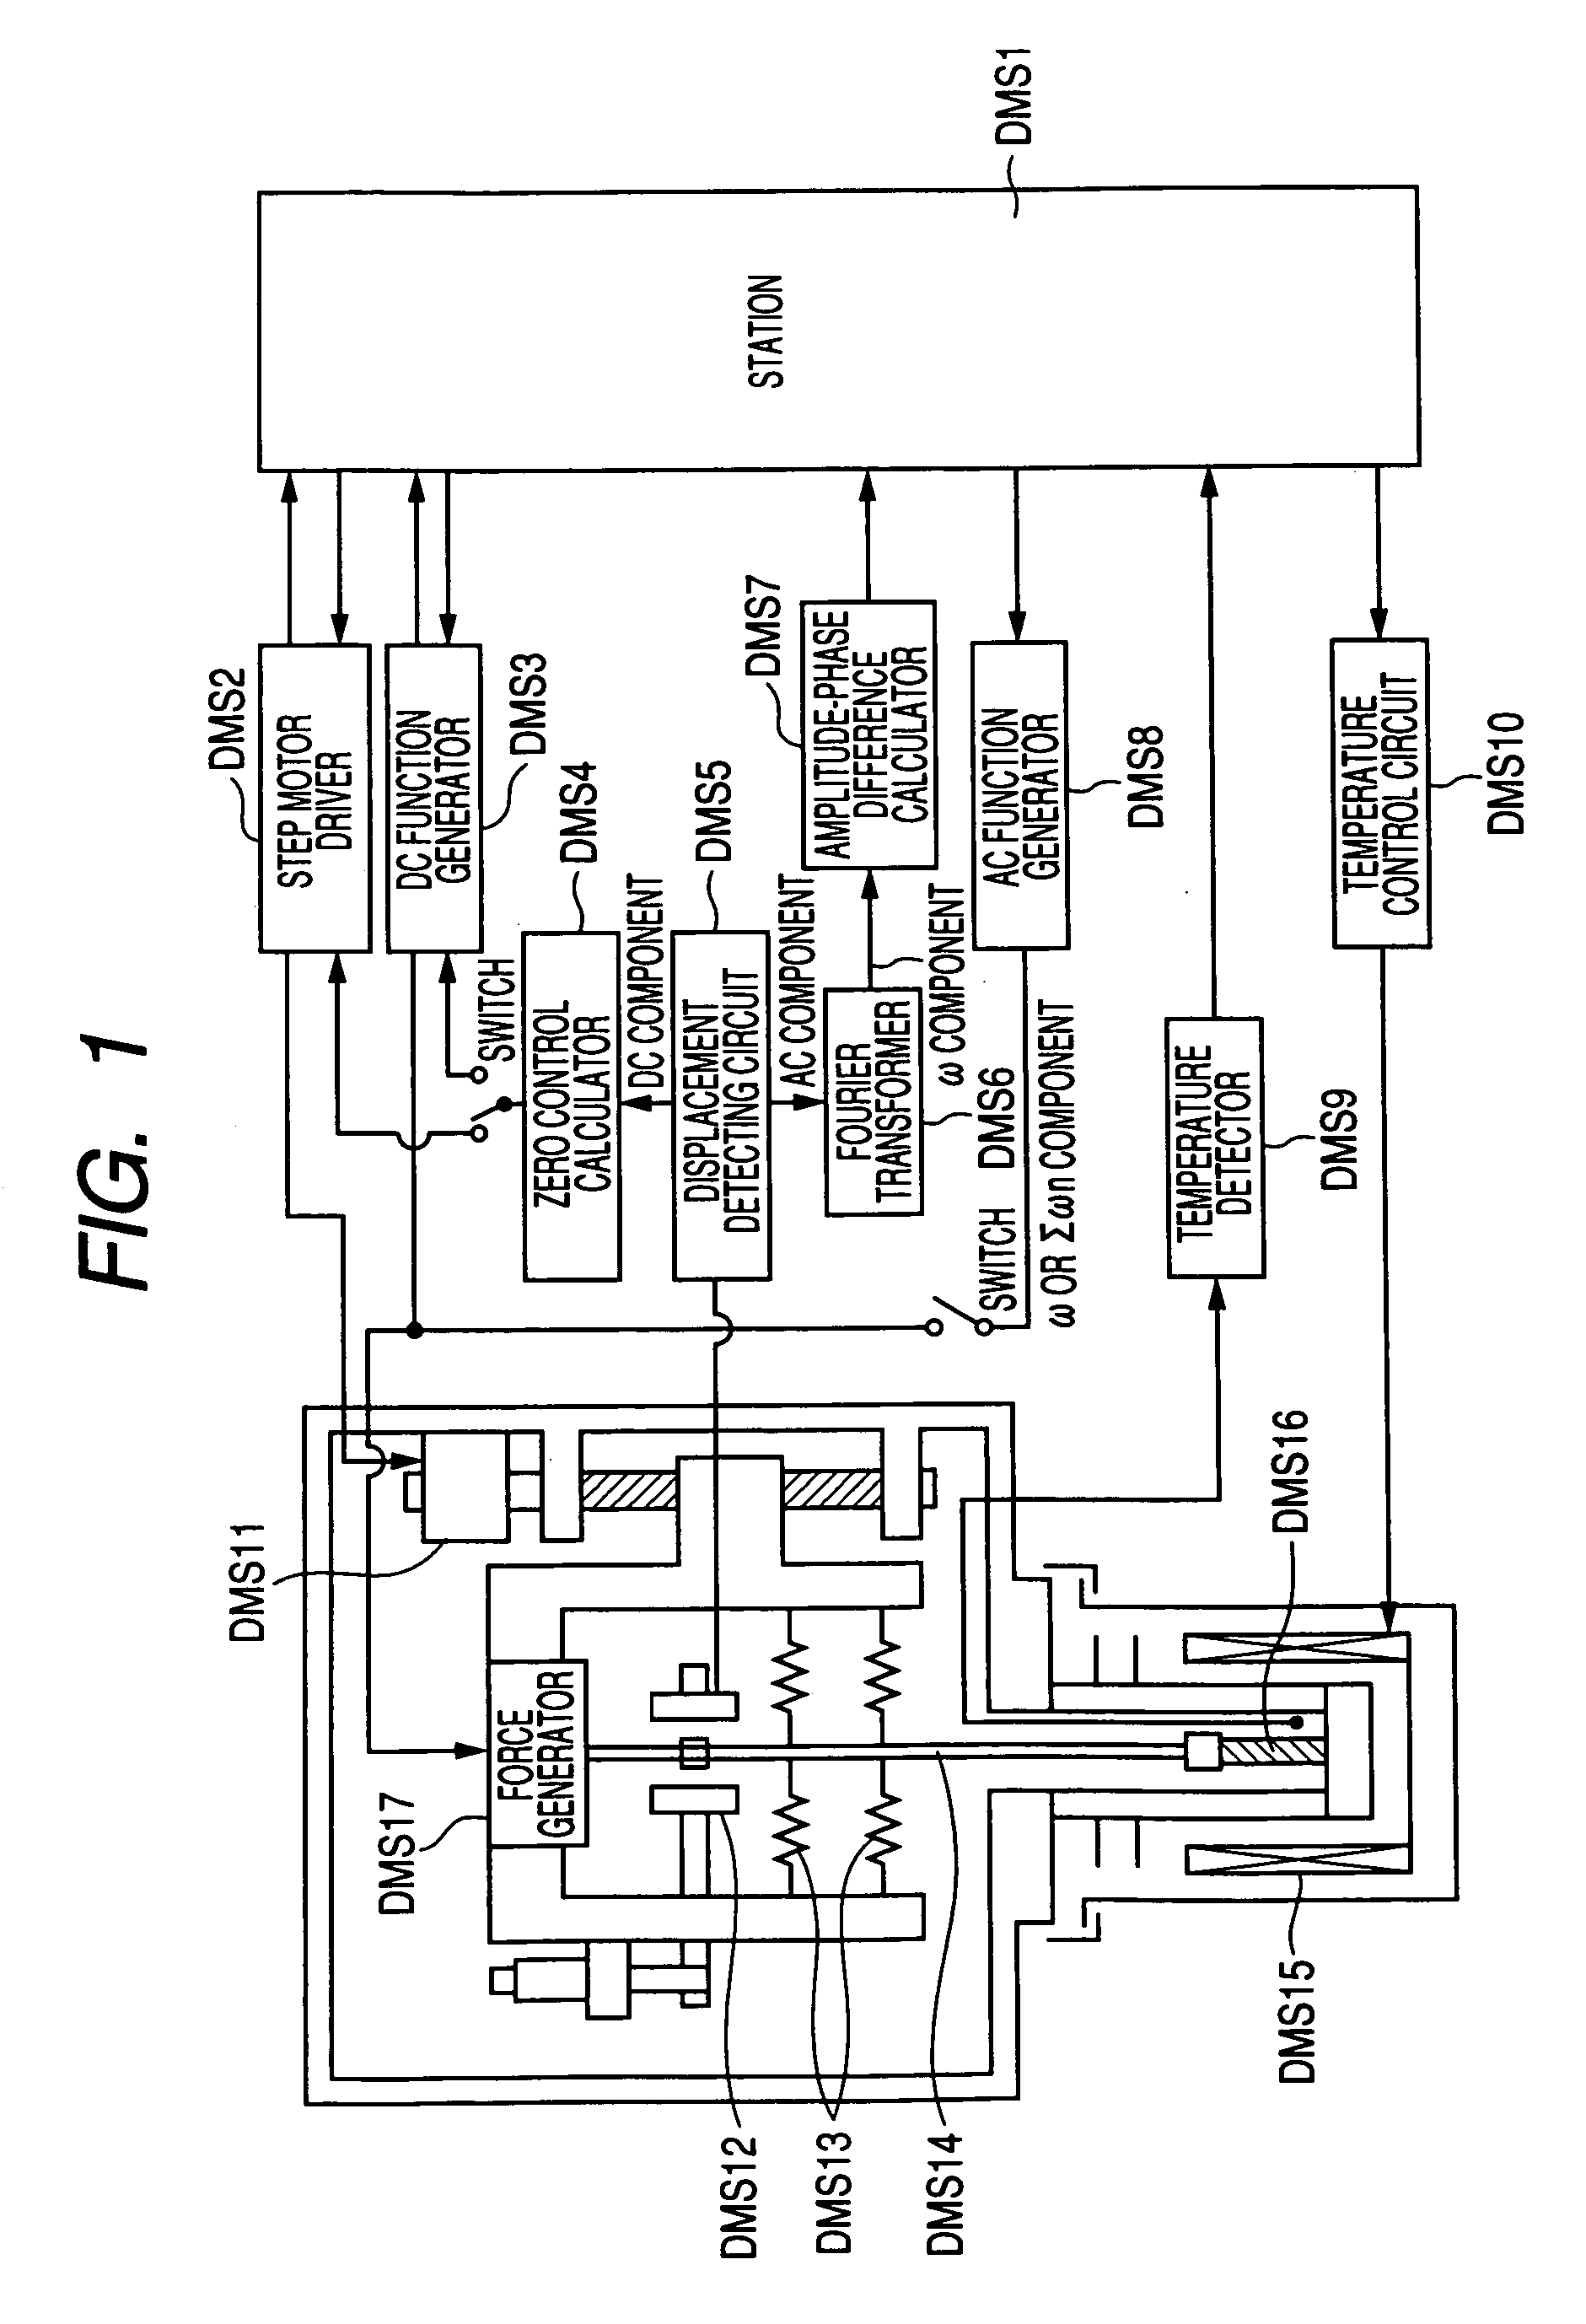 Optical fiber tape of low polarization mode dispersion characteristic and method for measuring dynamic viscoelasticity of the optical fiber tape